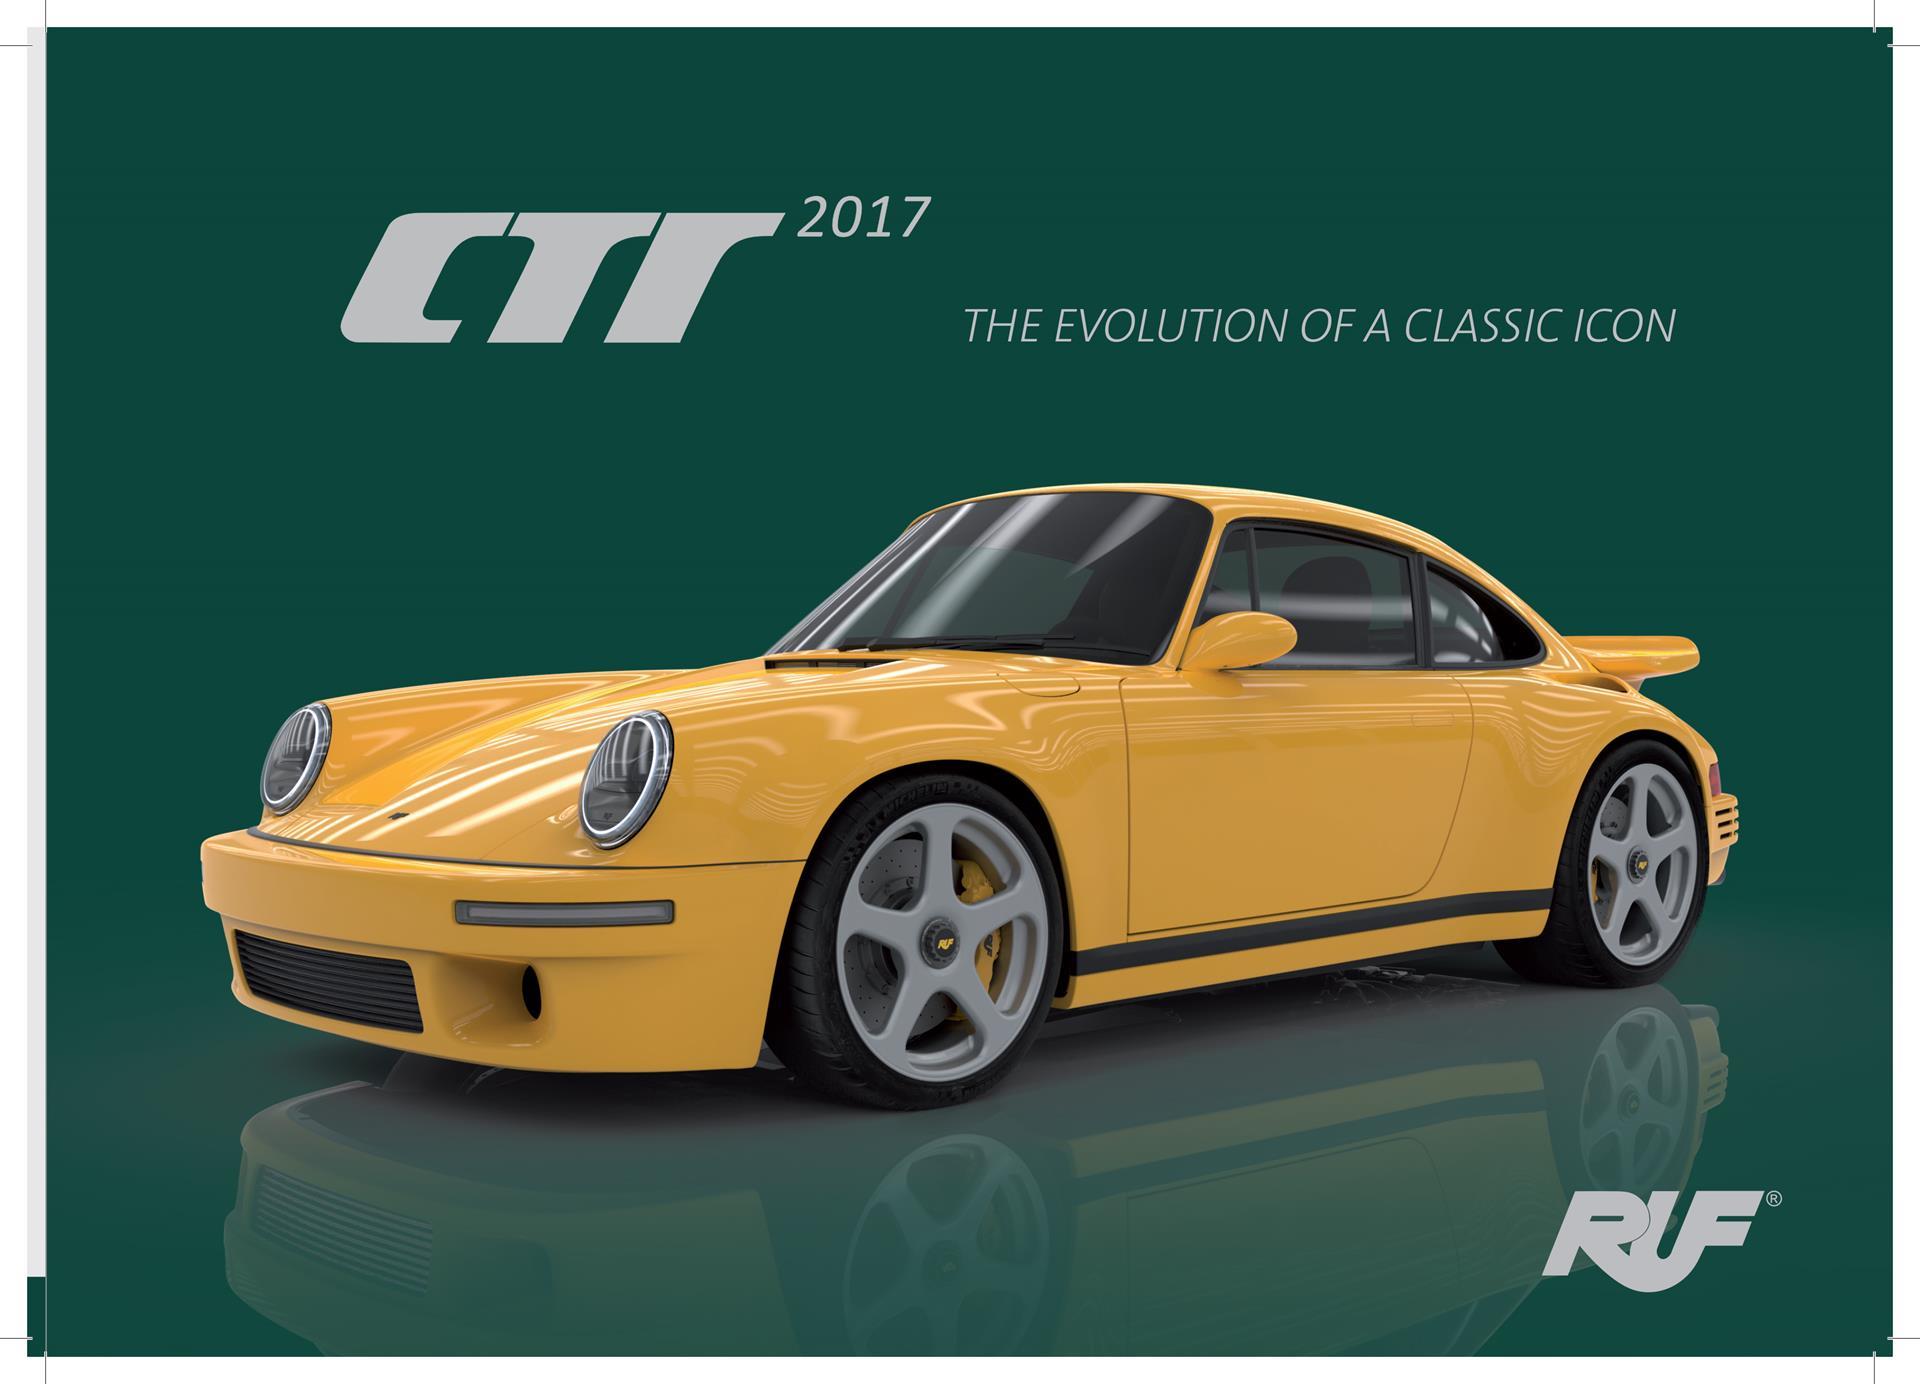 Ruf Ctr Wallpaper And Image Gallery Conceptcarz